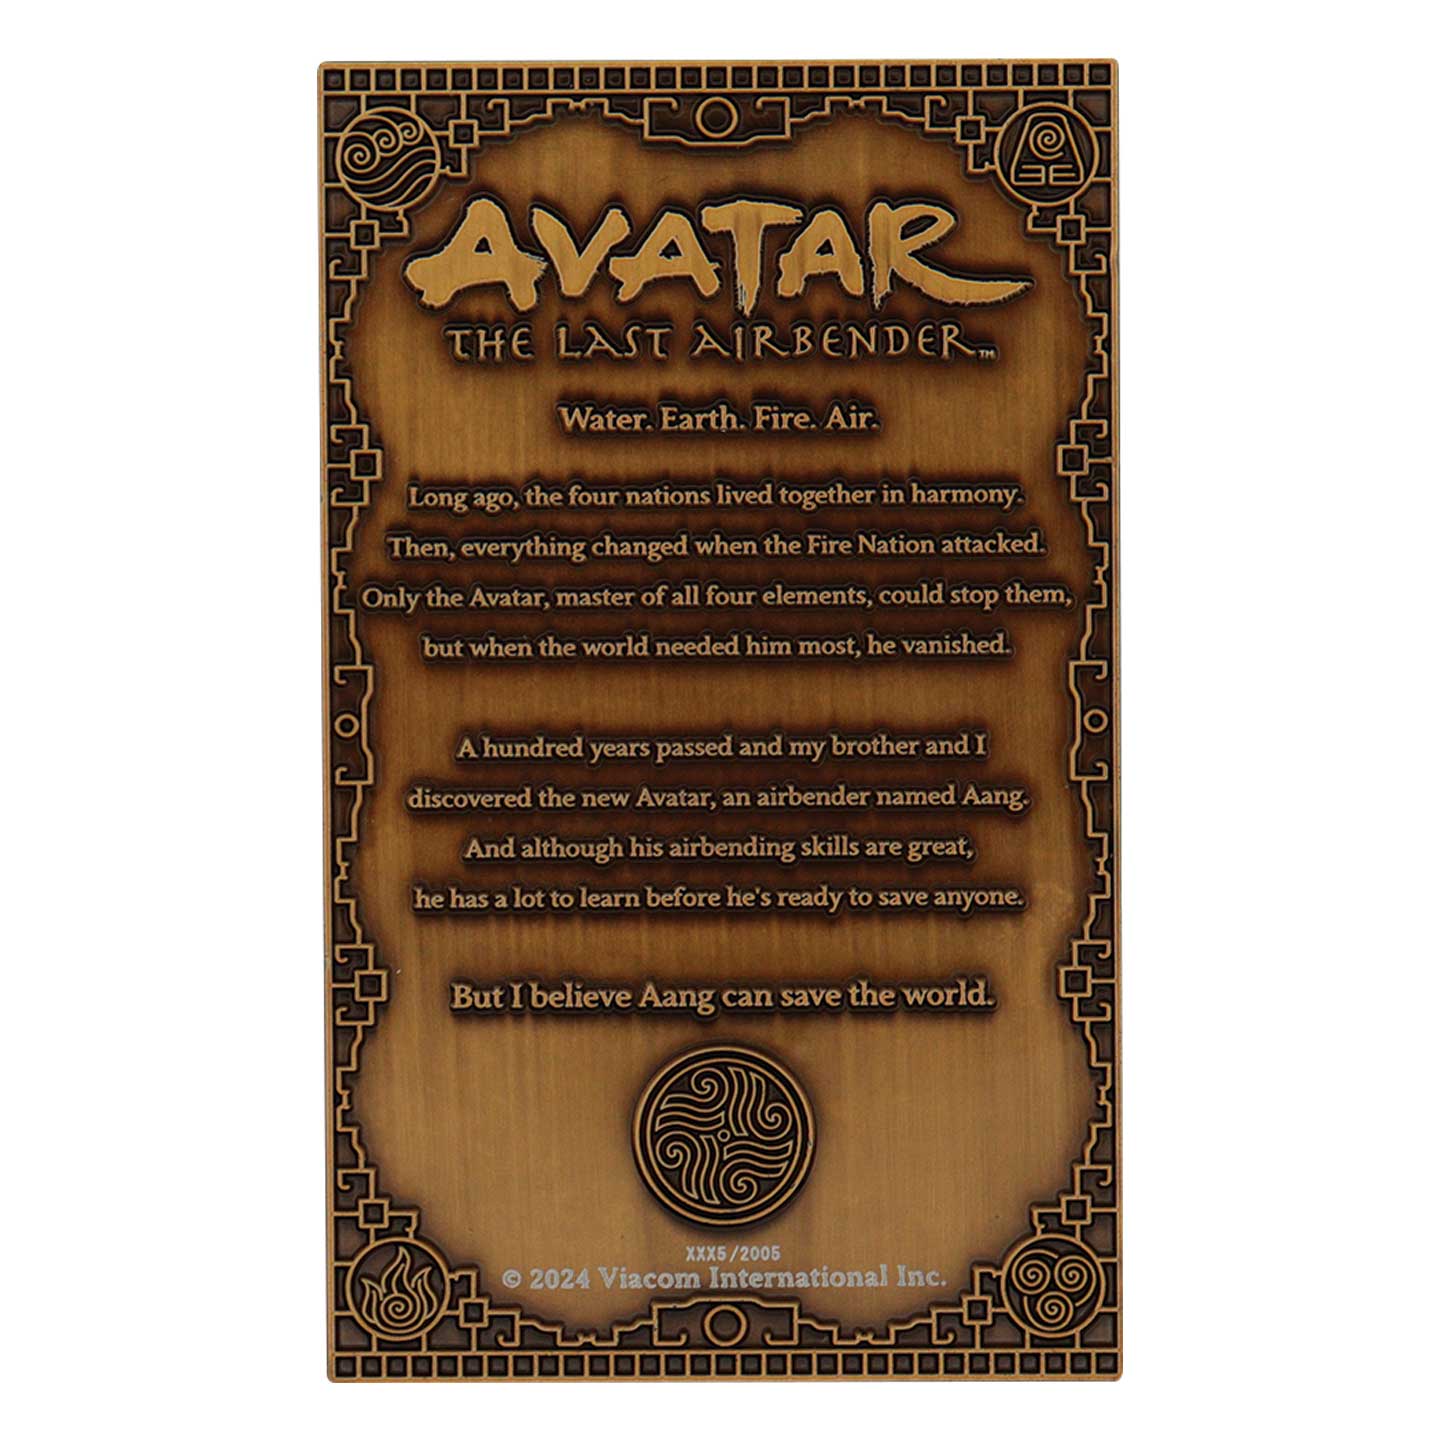 Avatar the Last Airbender Limited Edition Aang Ingot reverse